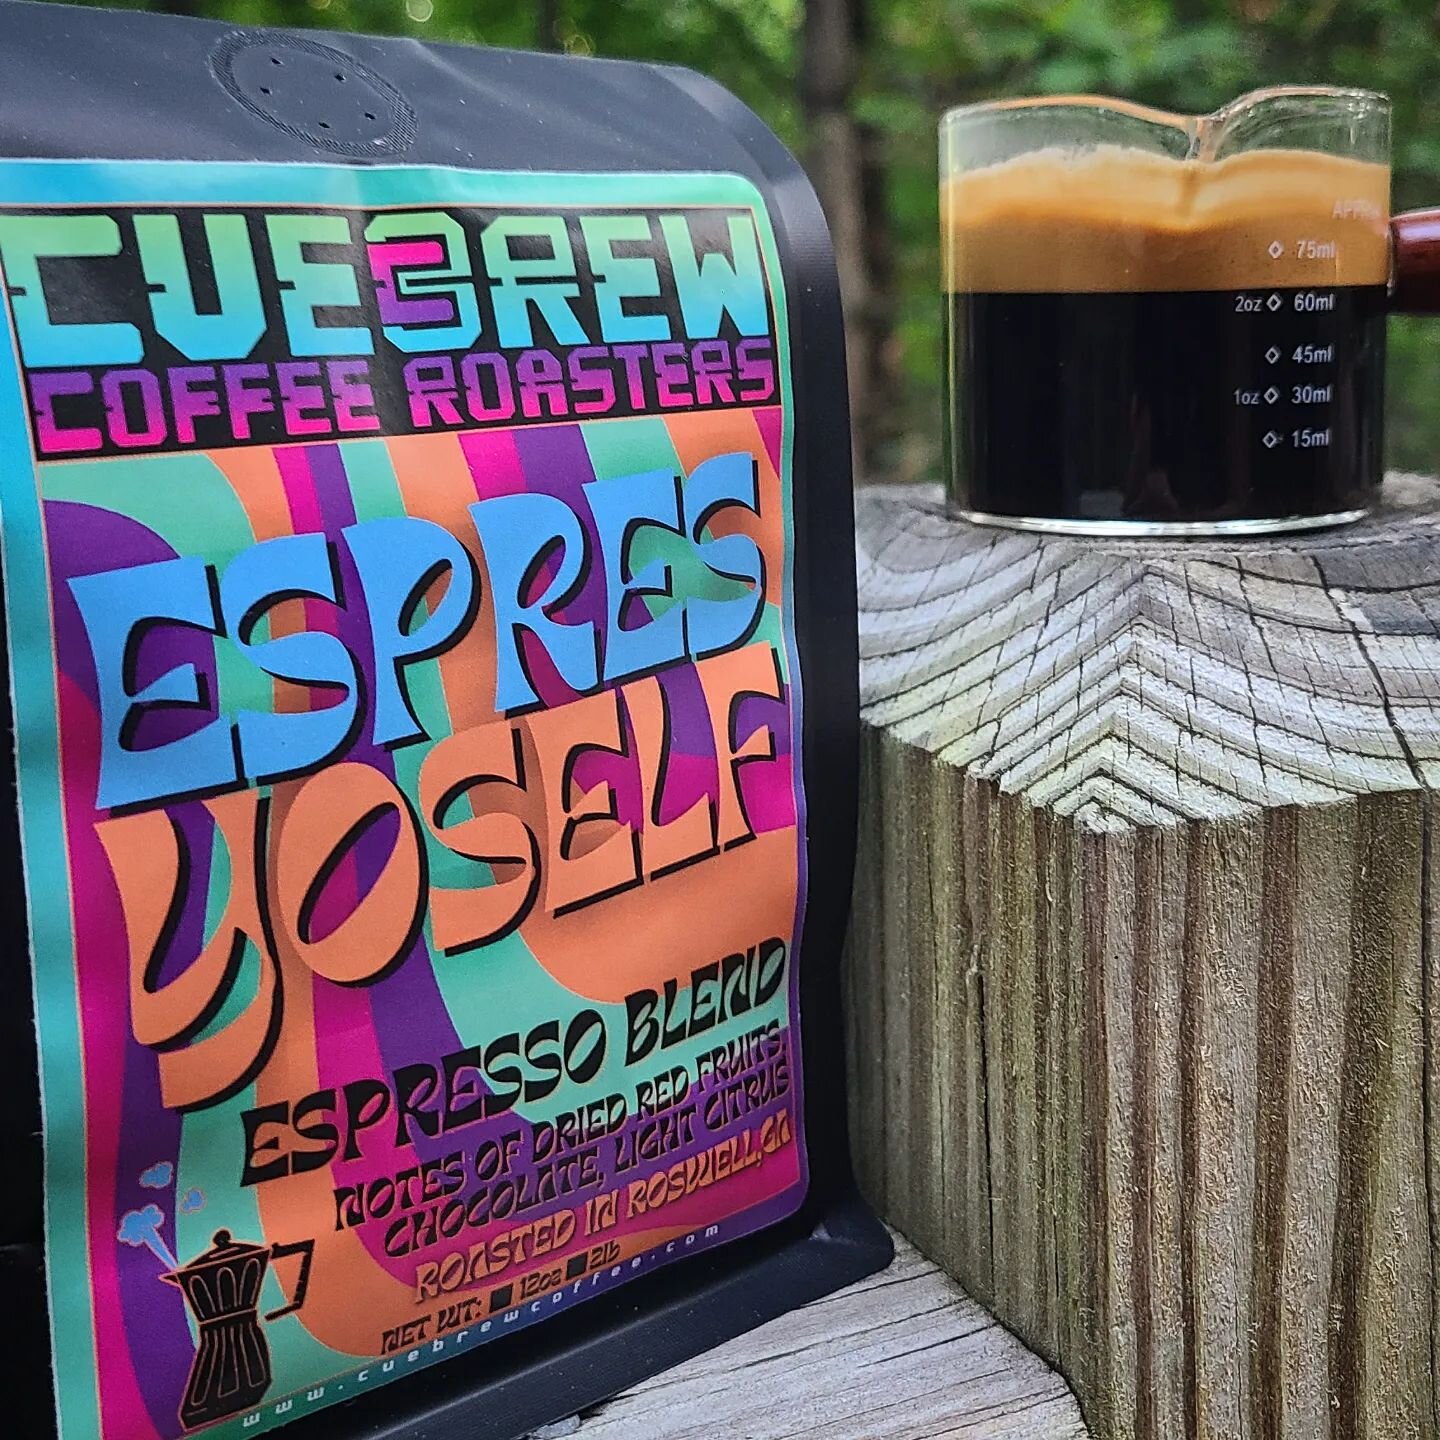 **COMING SOON** Inspired by Charles Wright's 1970 hit song Express Yourself. We've used all fair trade beans to create our first espresso blend! Red fruit, chocolate, and a light citrus finish. Roasted at the end of a medium and beginning of dark. Th